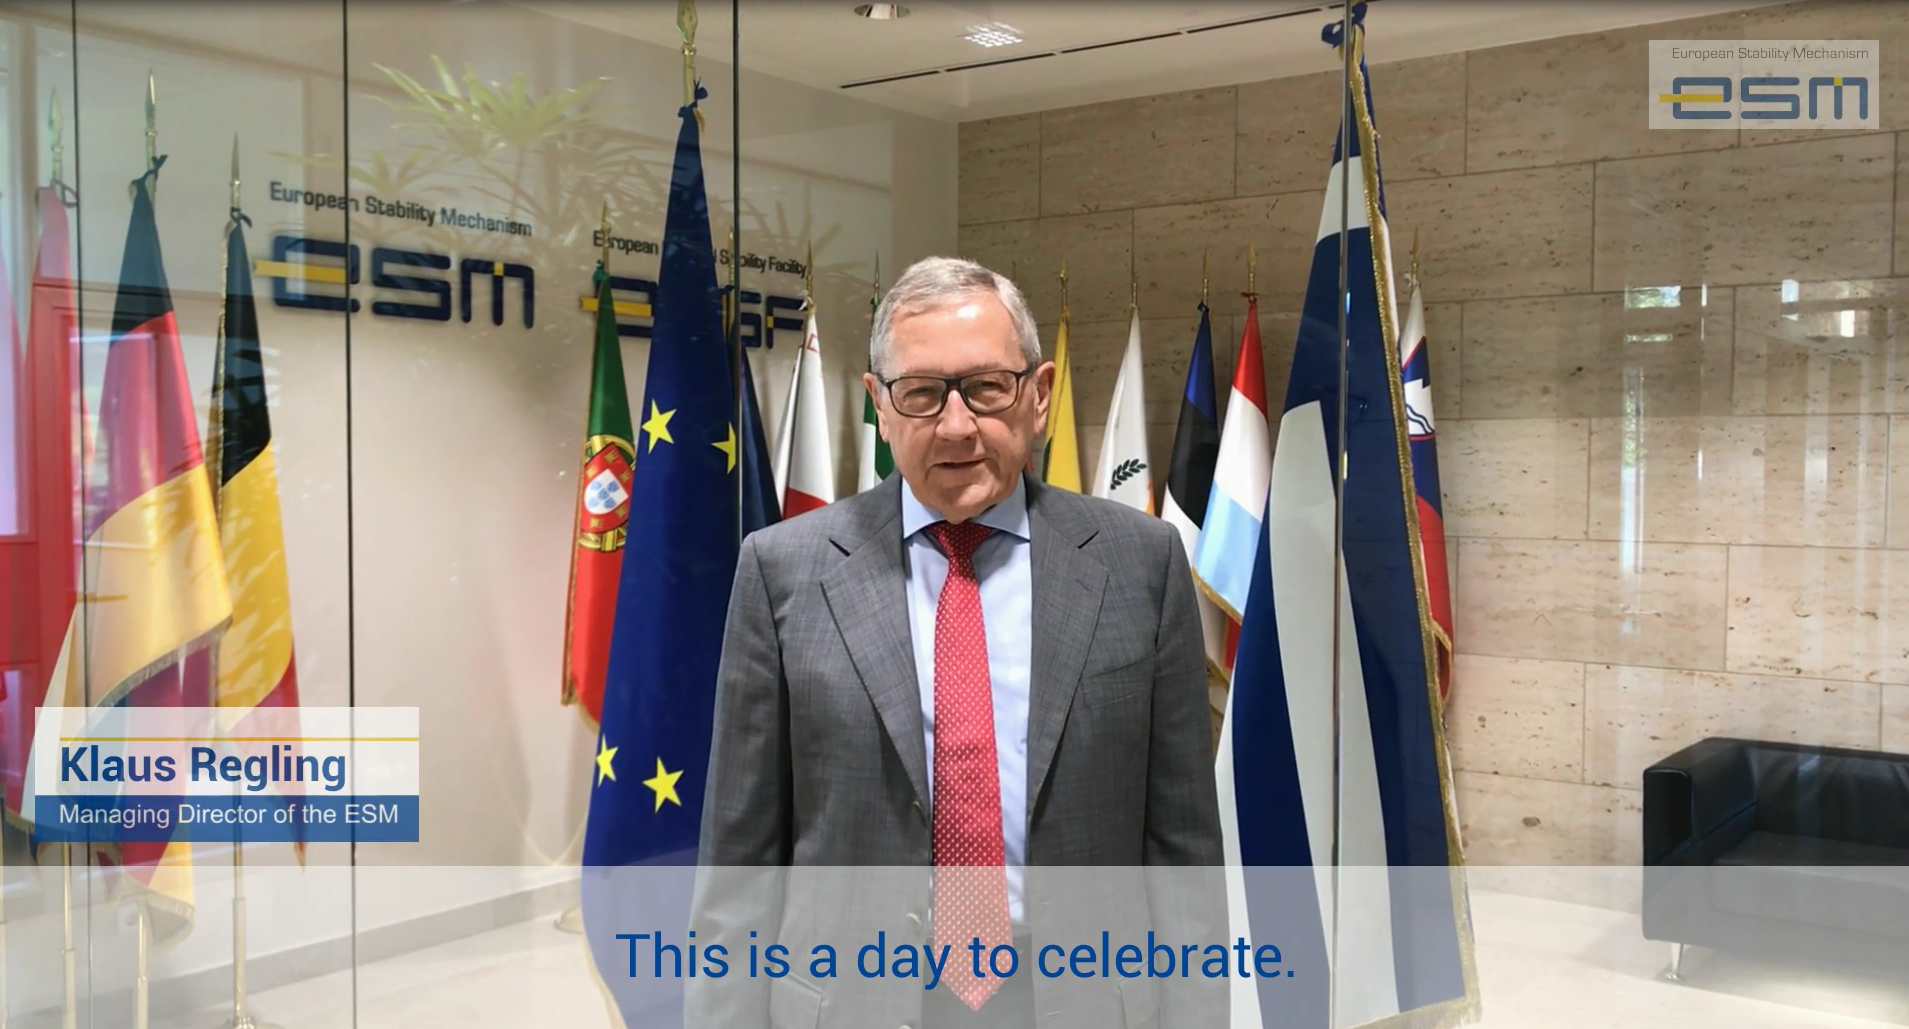 Video statement by Klaus Regling, managing Director of ESM, on Greece successfully concluding the ESM programme